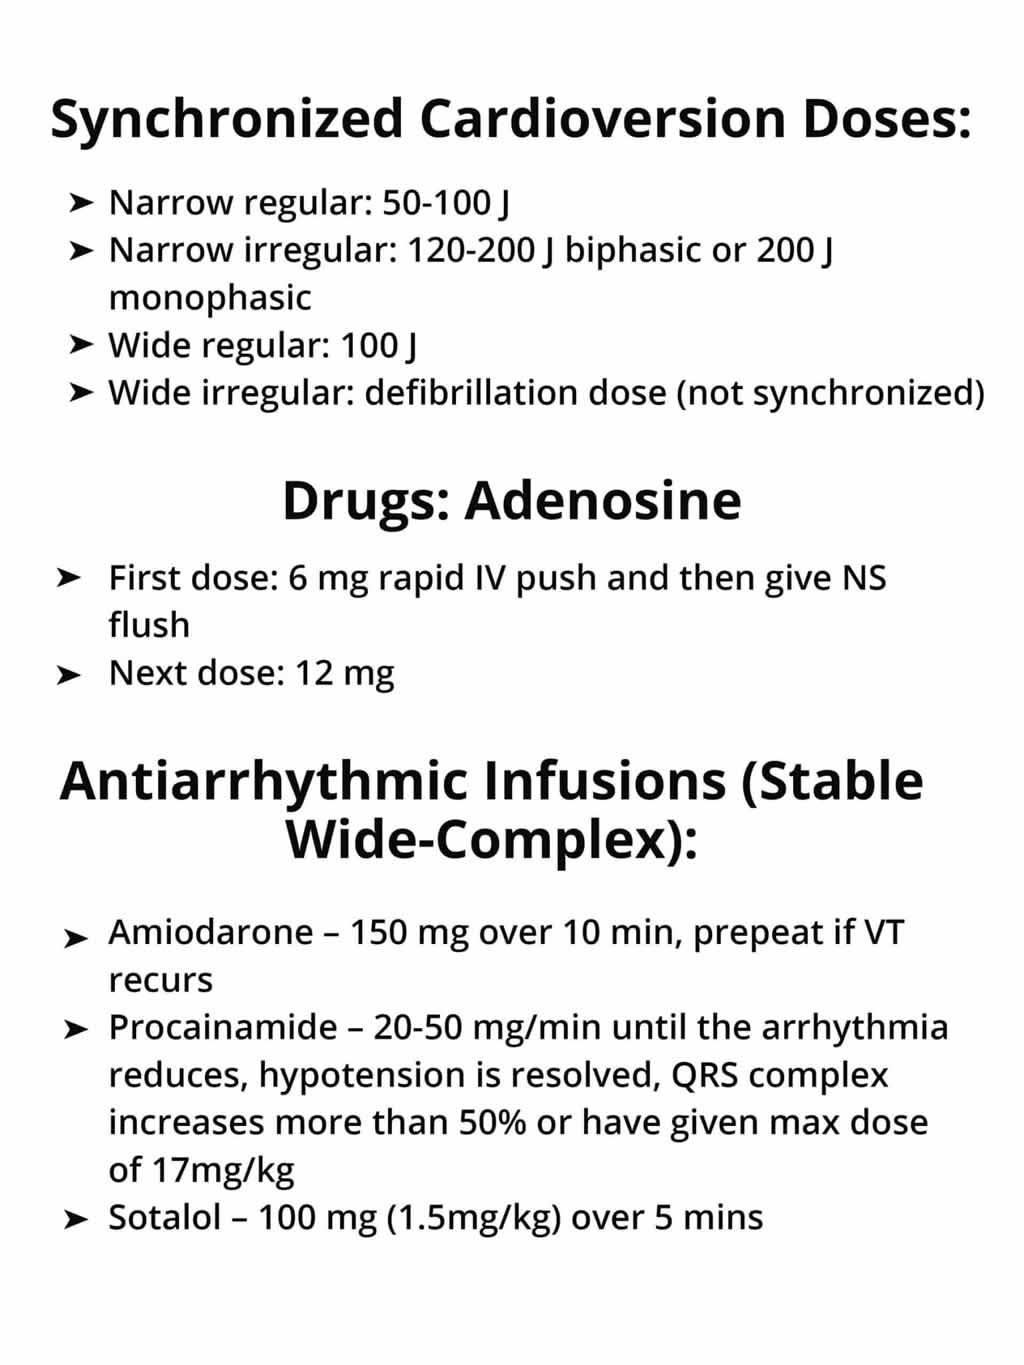 Synchronized Cardioversion Doses